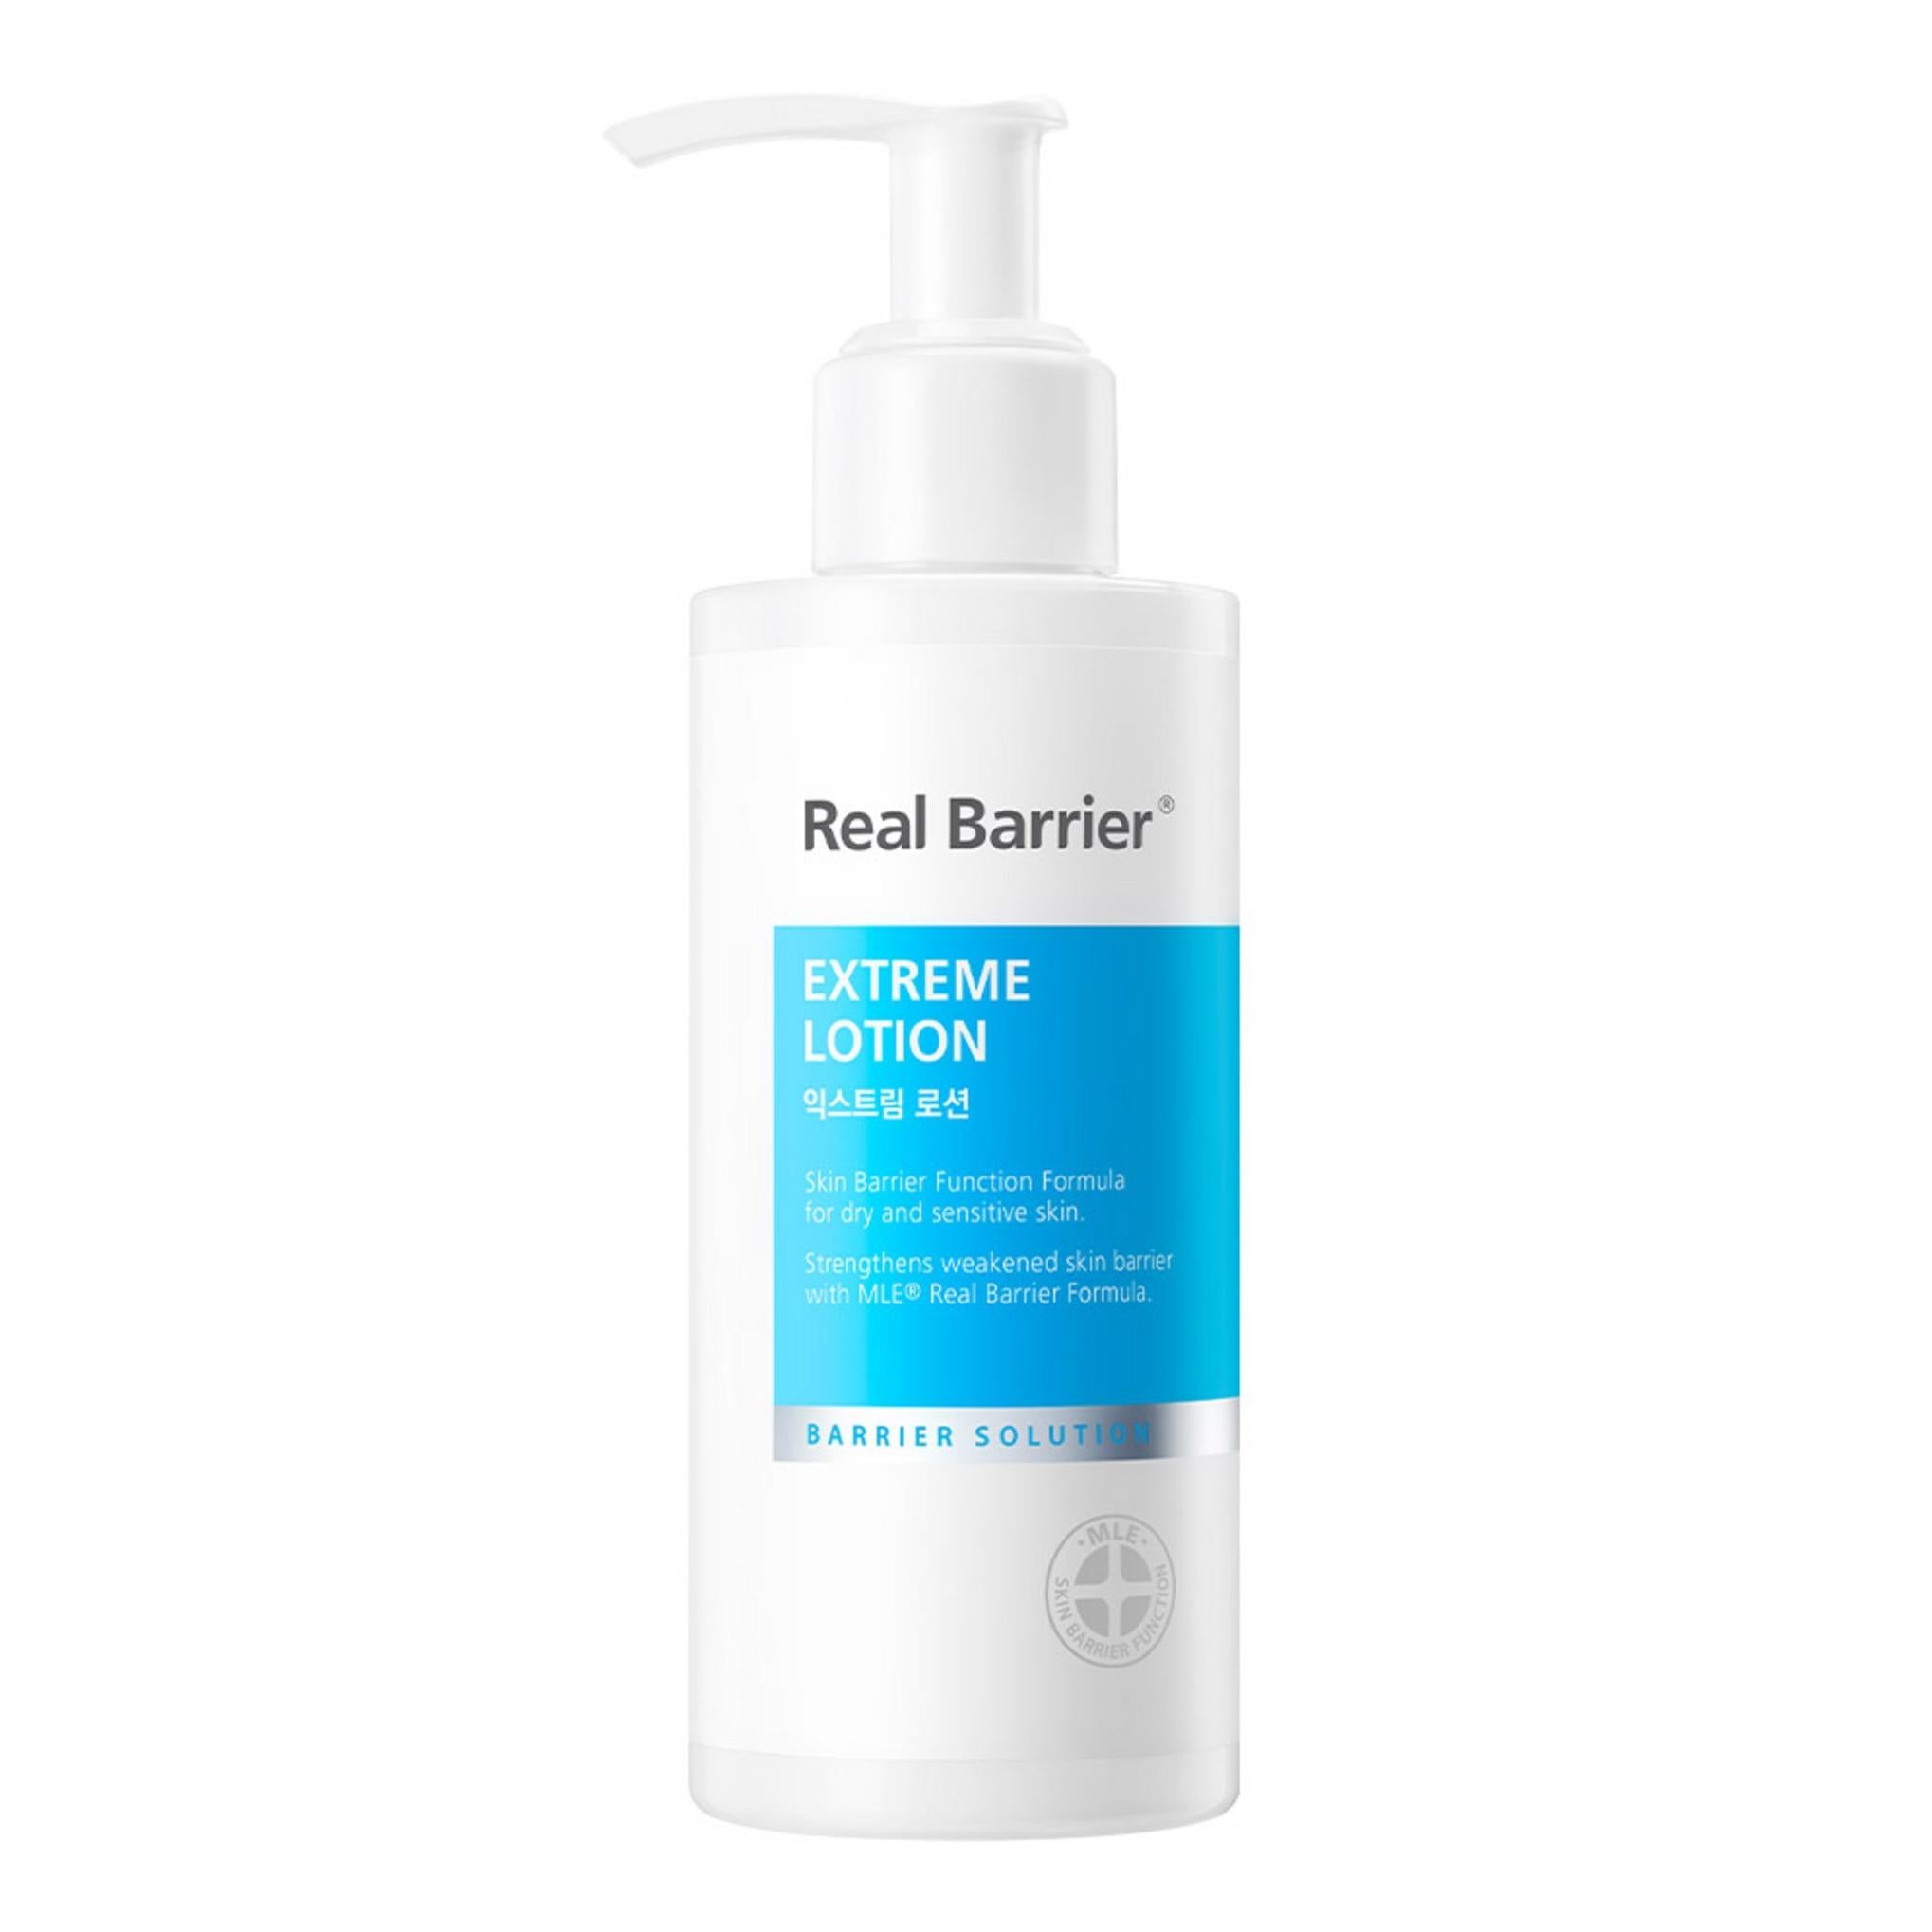 Real Barrier Extreme Lotion